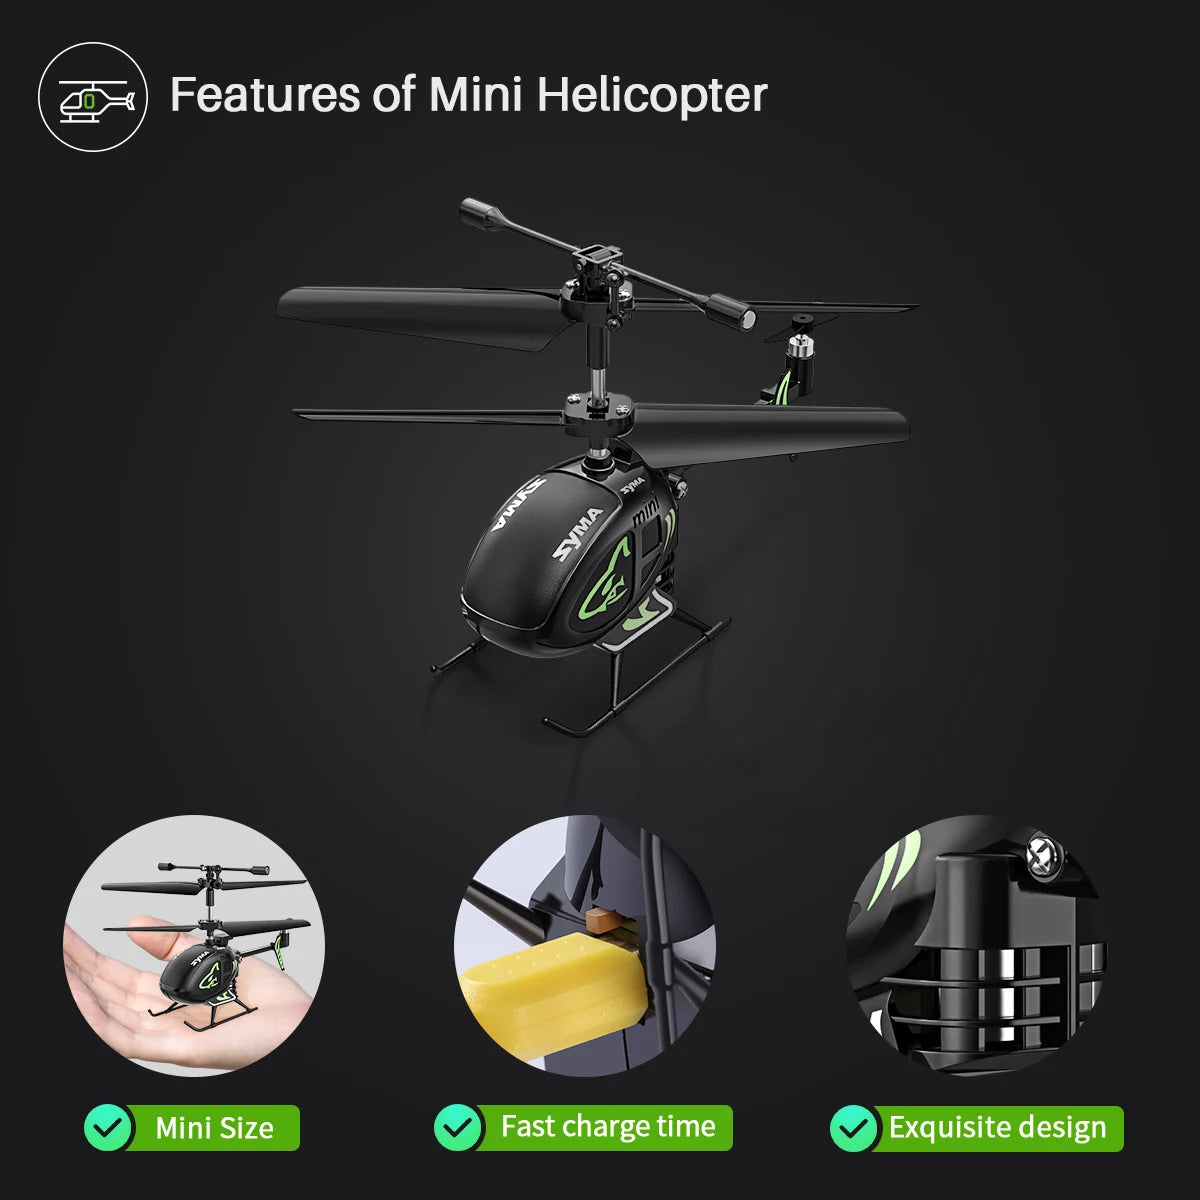 SYMA S100 Mini Helicopter, Features of Mini Helicopter Mini Size Fast charge time Exquisite design